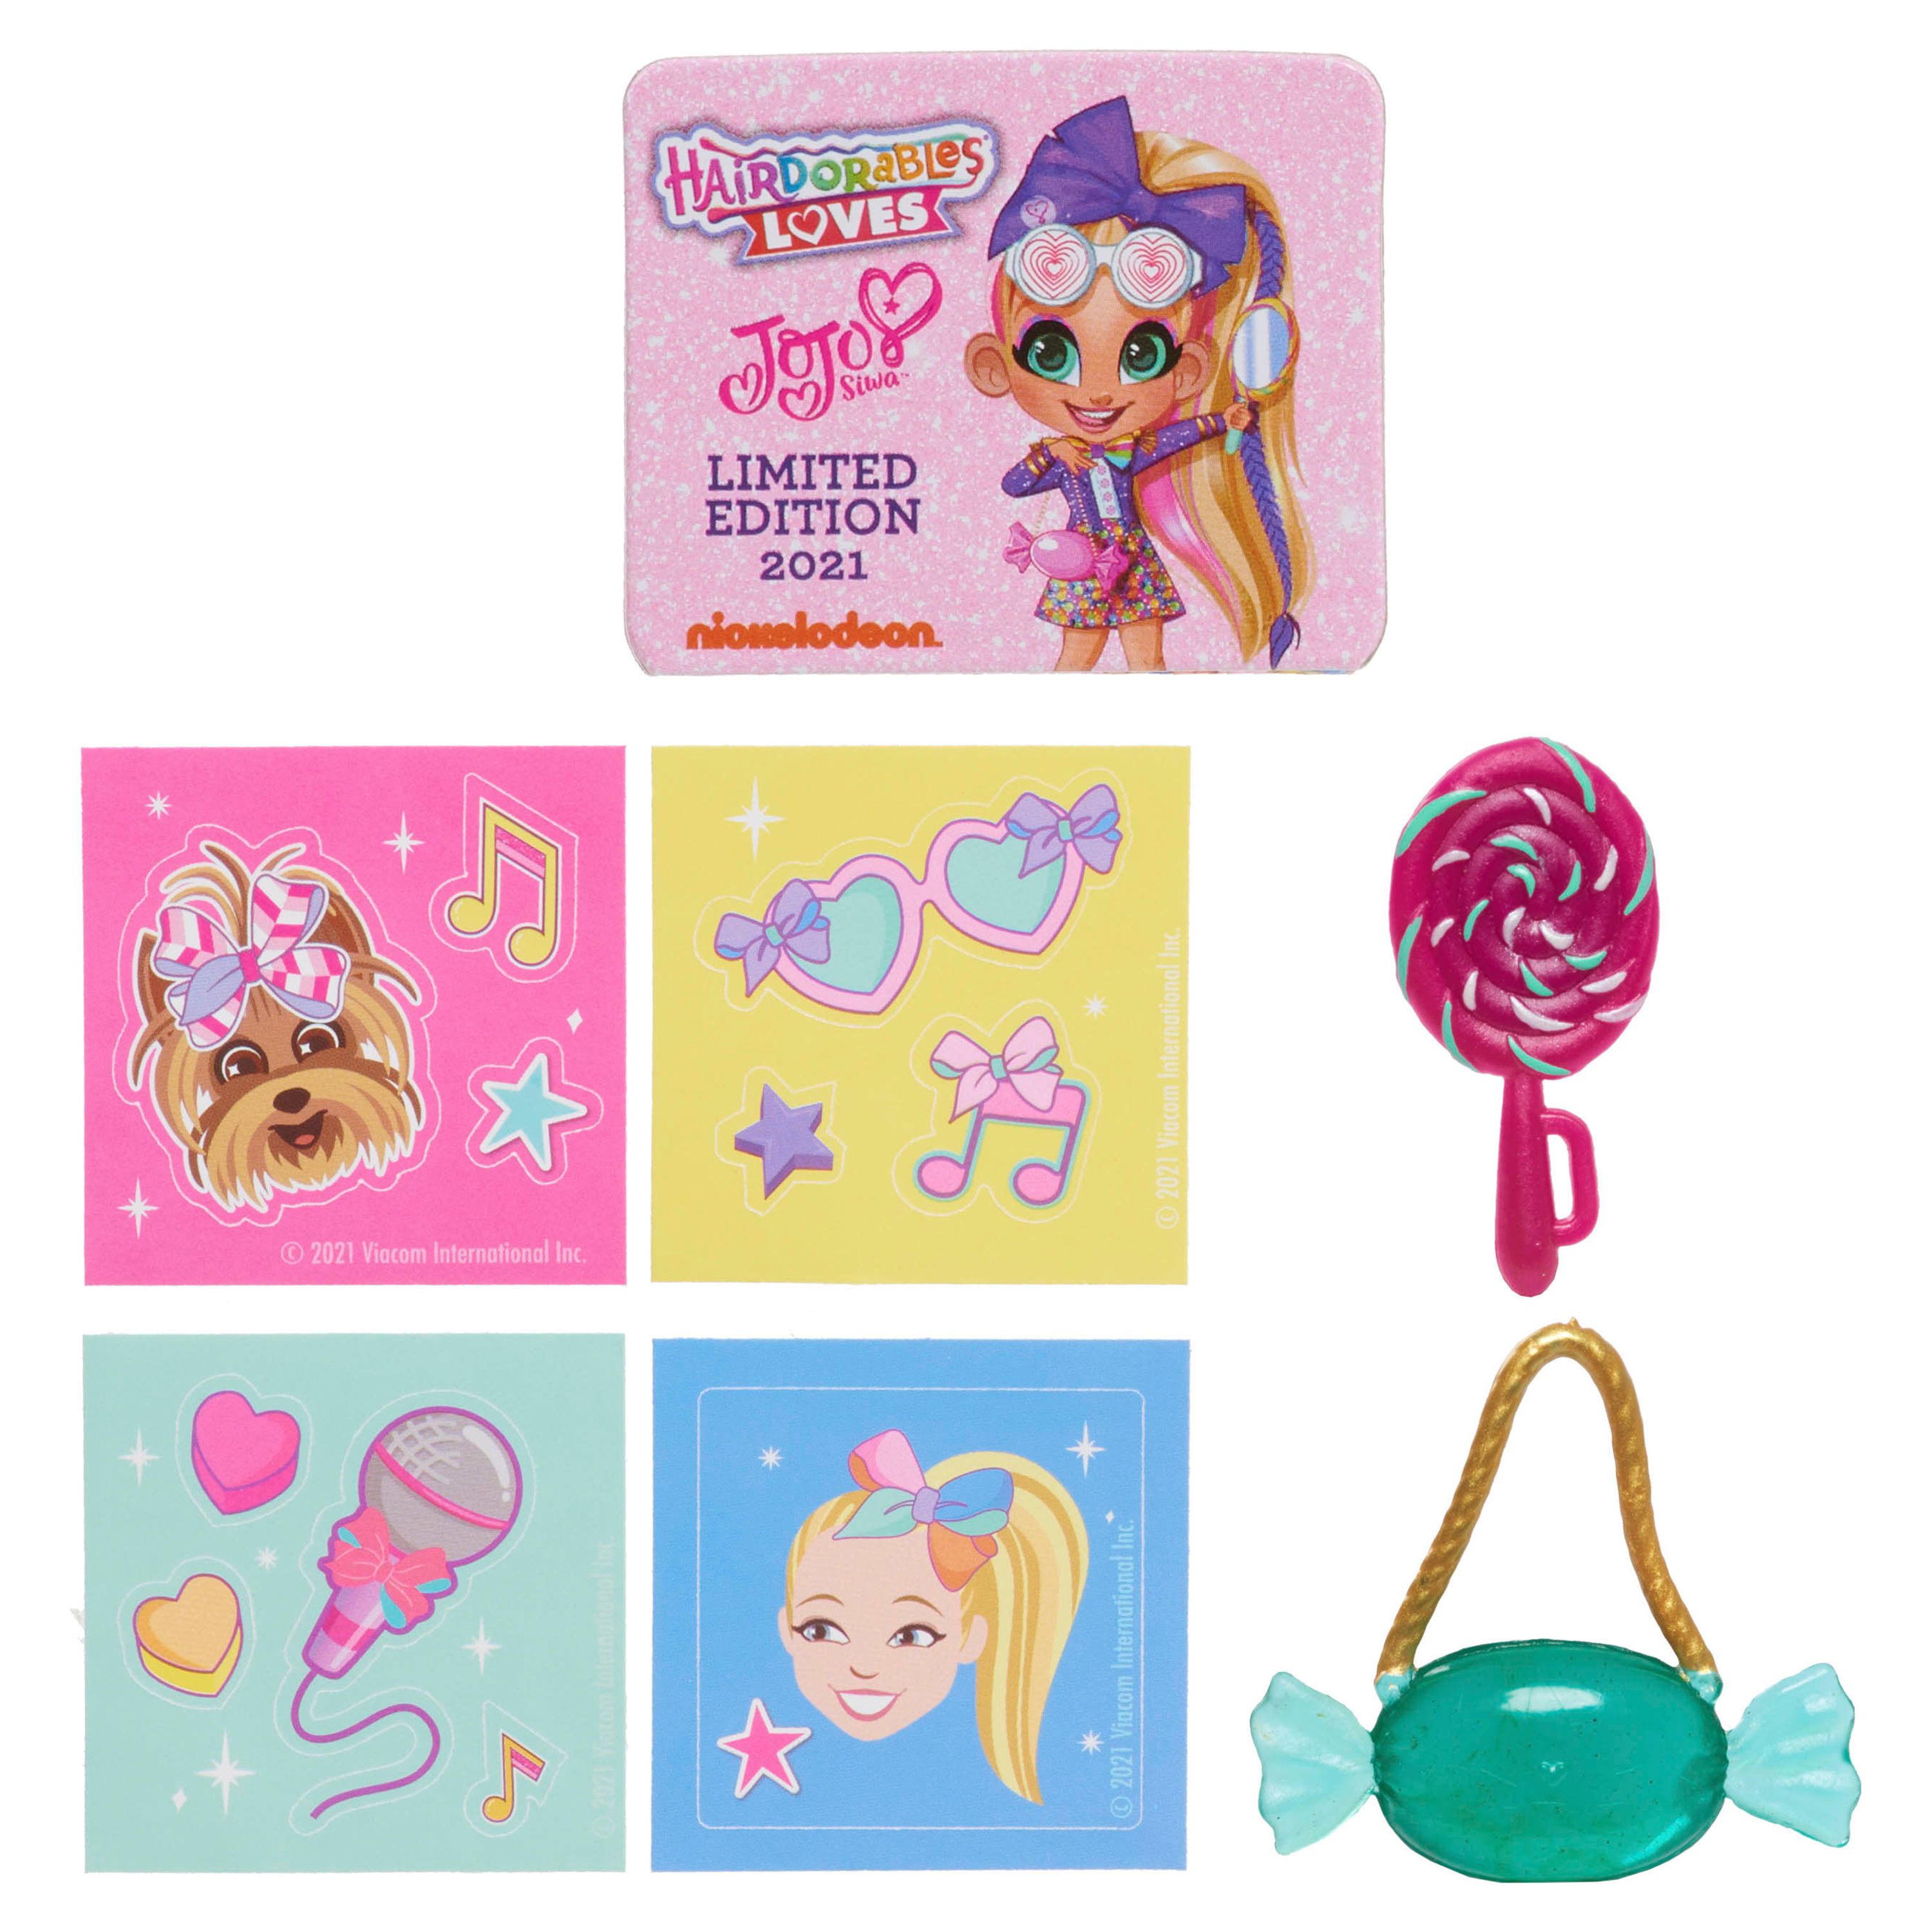 JoJo Siwa Hairdorables Loves JoJo Limited Edition Collectible Doll, Series 4, Candy Time, Includes 10 Surprises,  Kids Toys for Ages 3 Up, Gifts and Presents - image 4 of 6